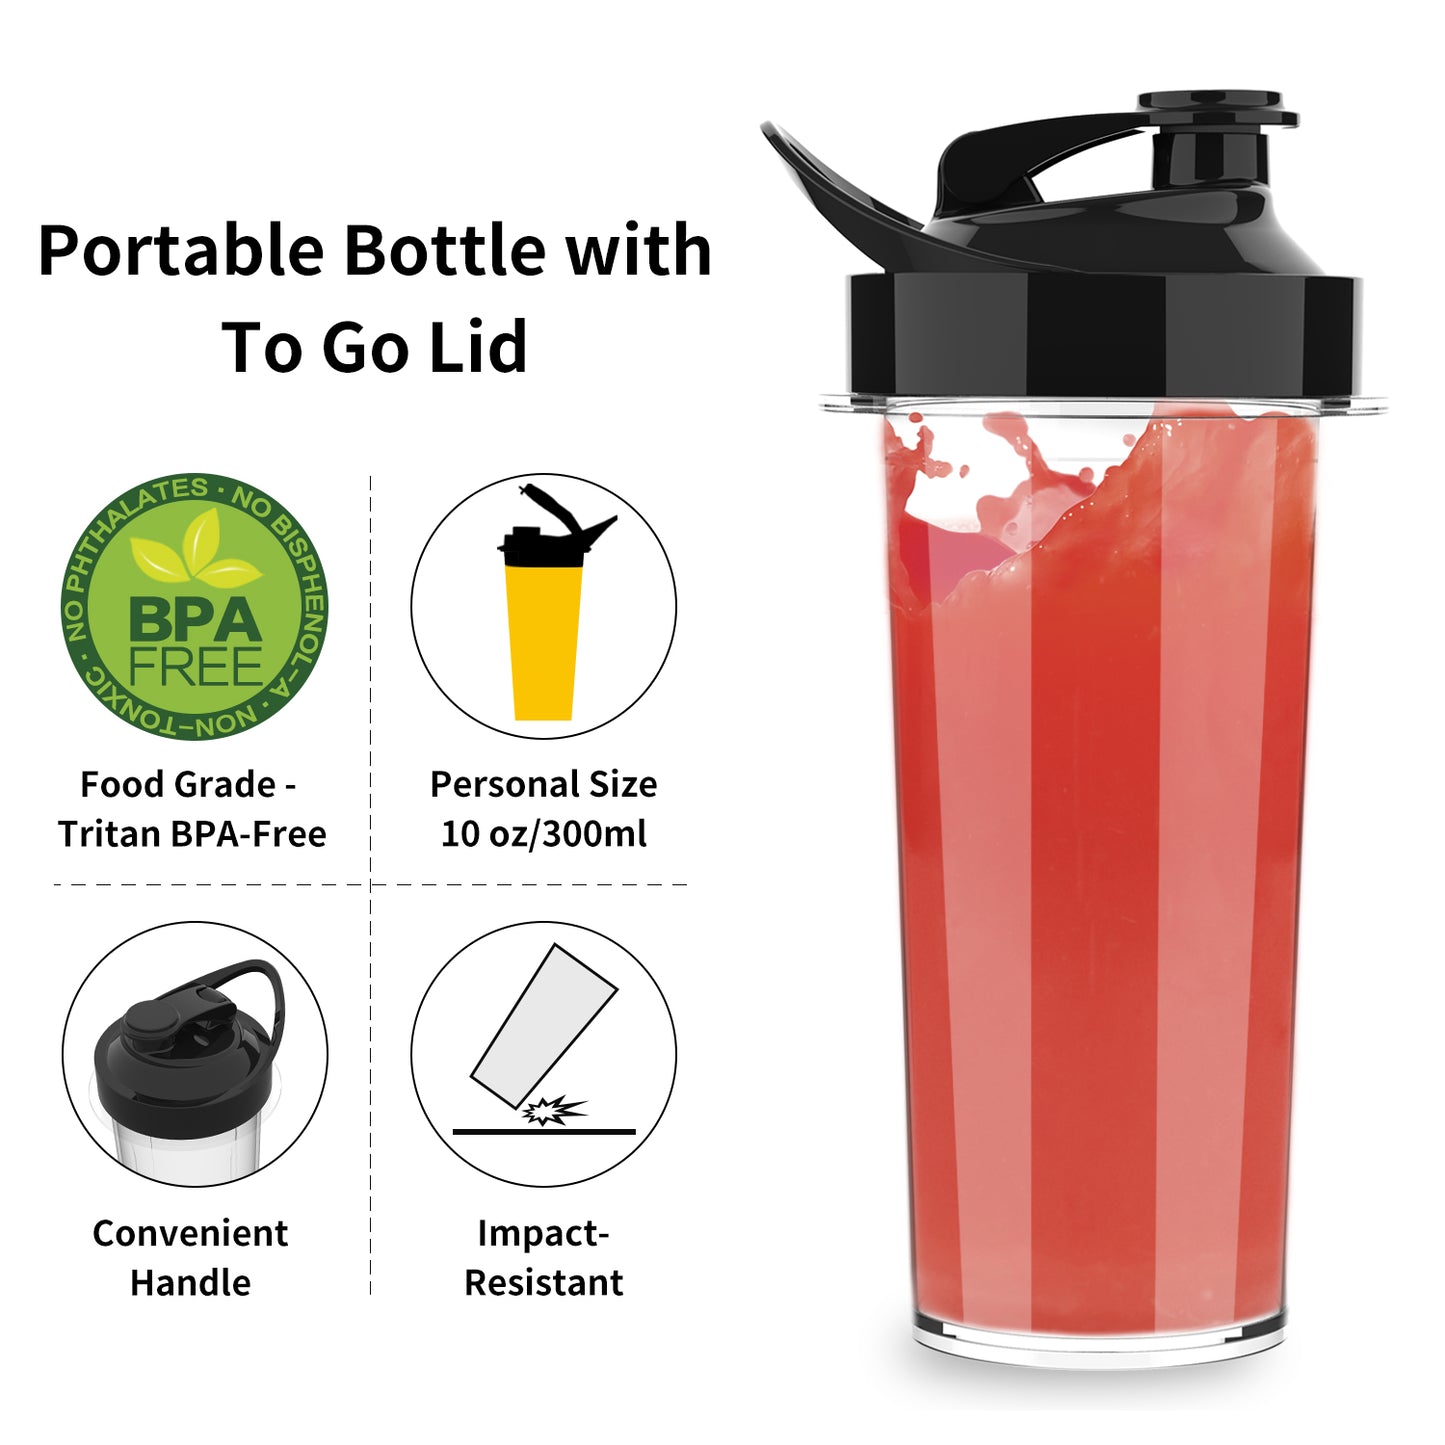 La Reveuse Personal Blender for Shakes and Smoothies 200 Watt with Magnetic Drive Technology 10 oz BPA Free Portable Travel Bottle (Black)